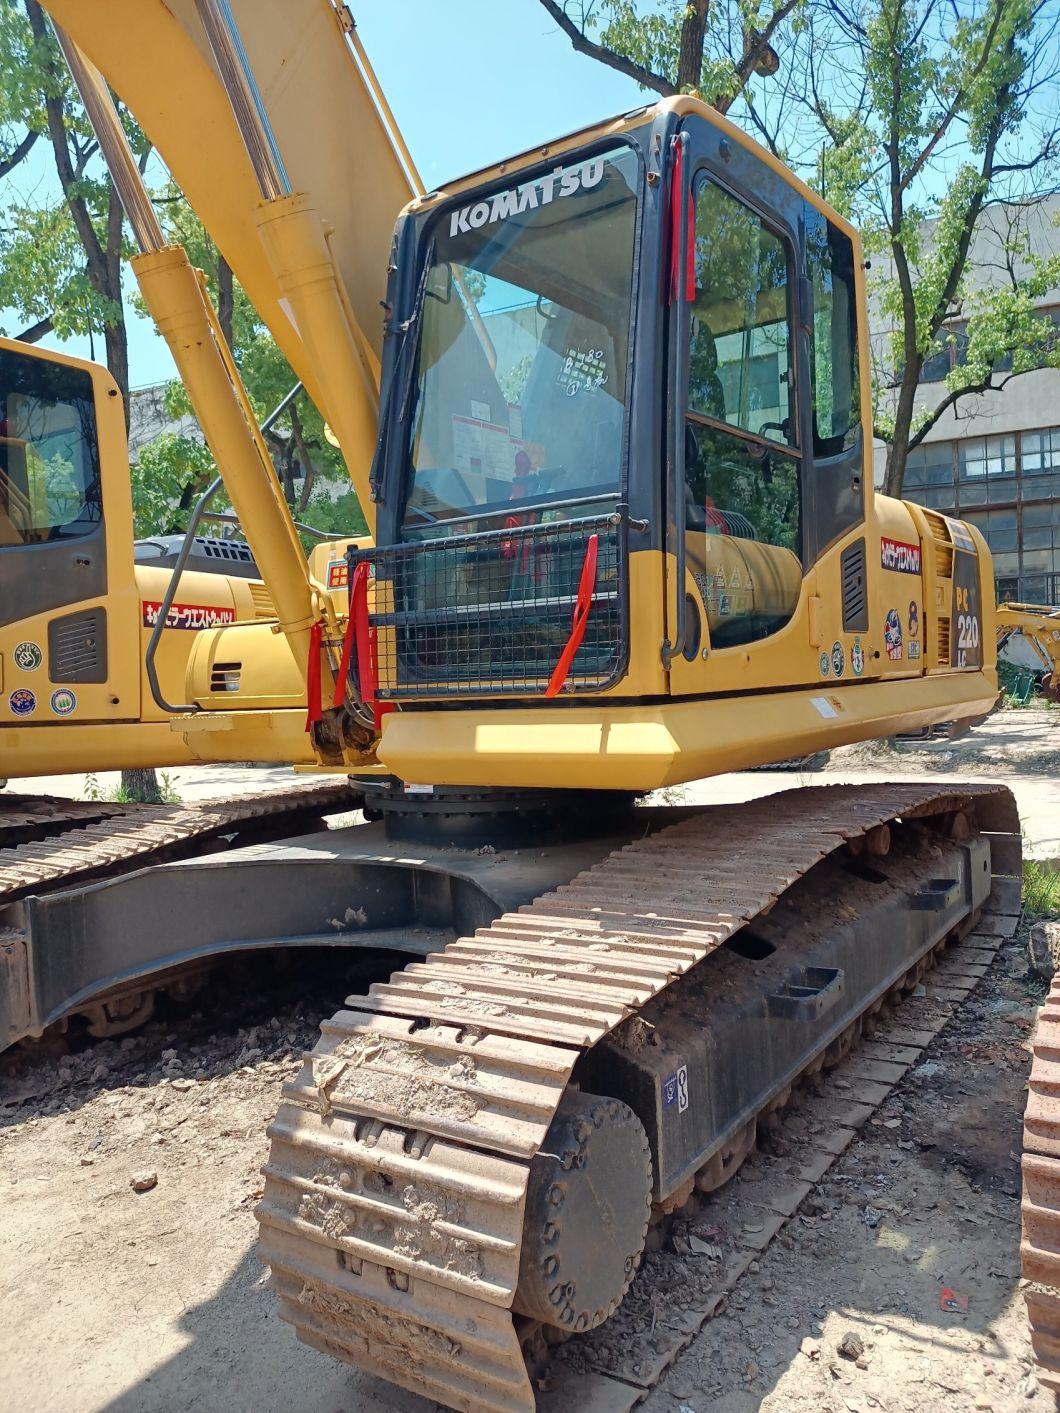 Used Komatsuu PC220LC 22tons Track Tractor for Sale Max Philippines Colombia Canada India Unique Africa Power Excavators